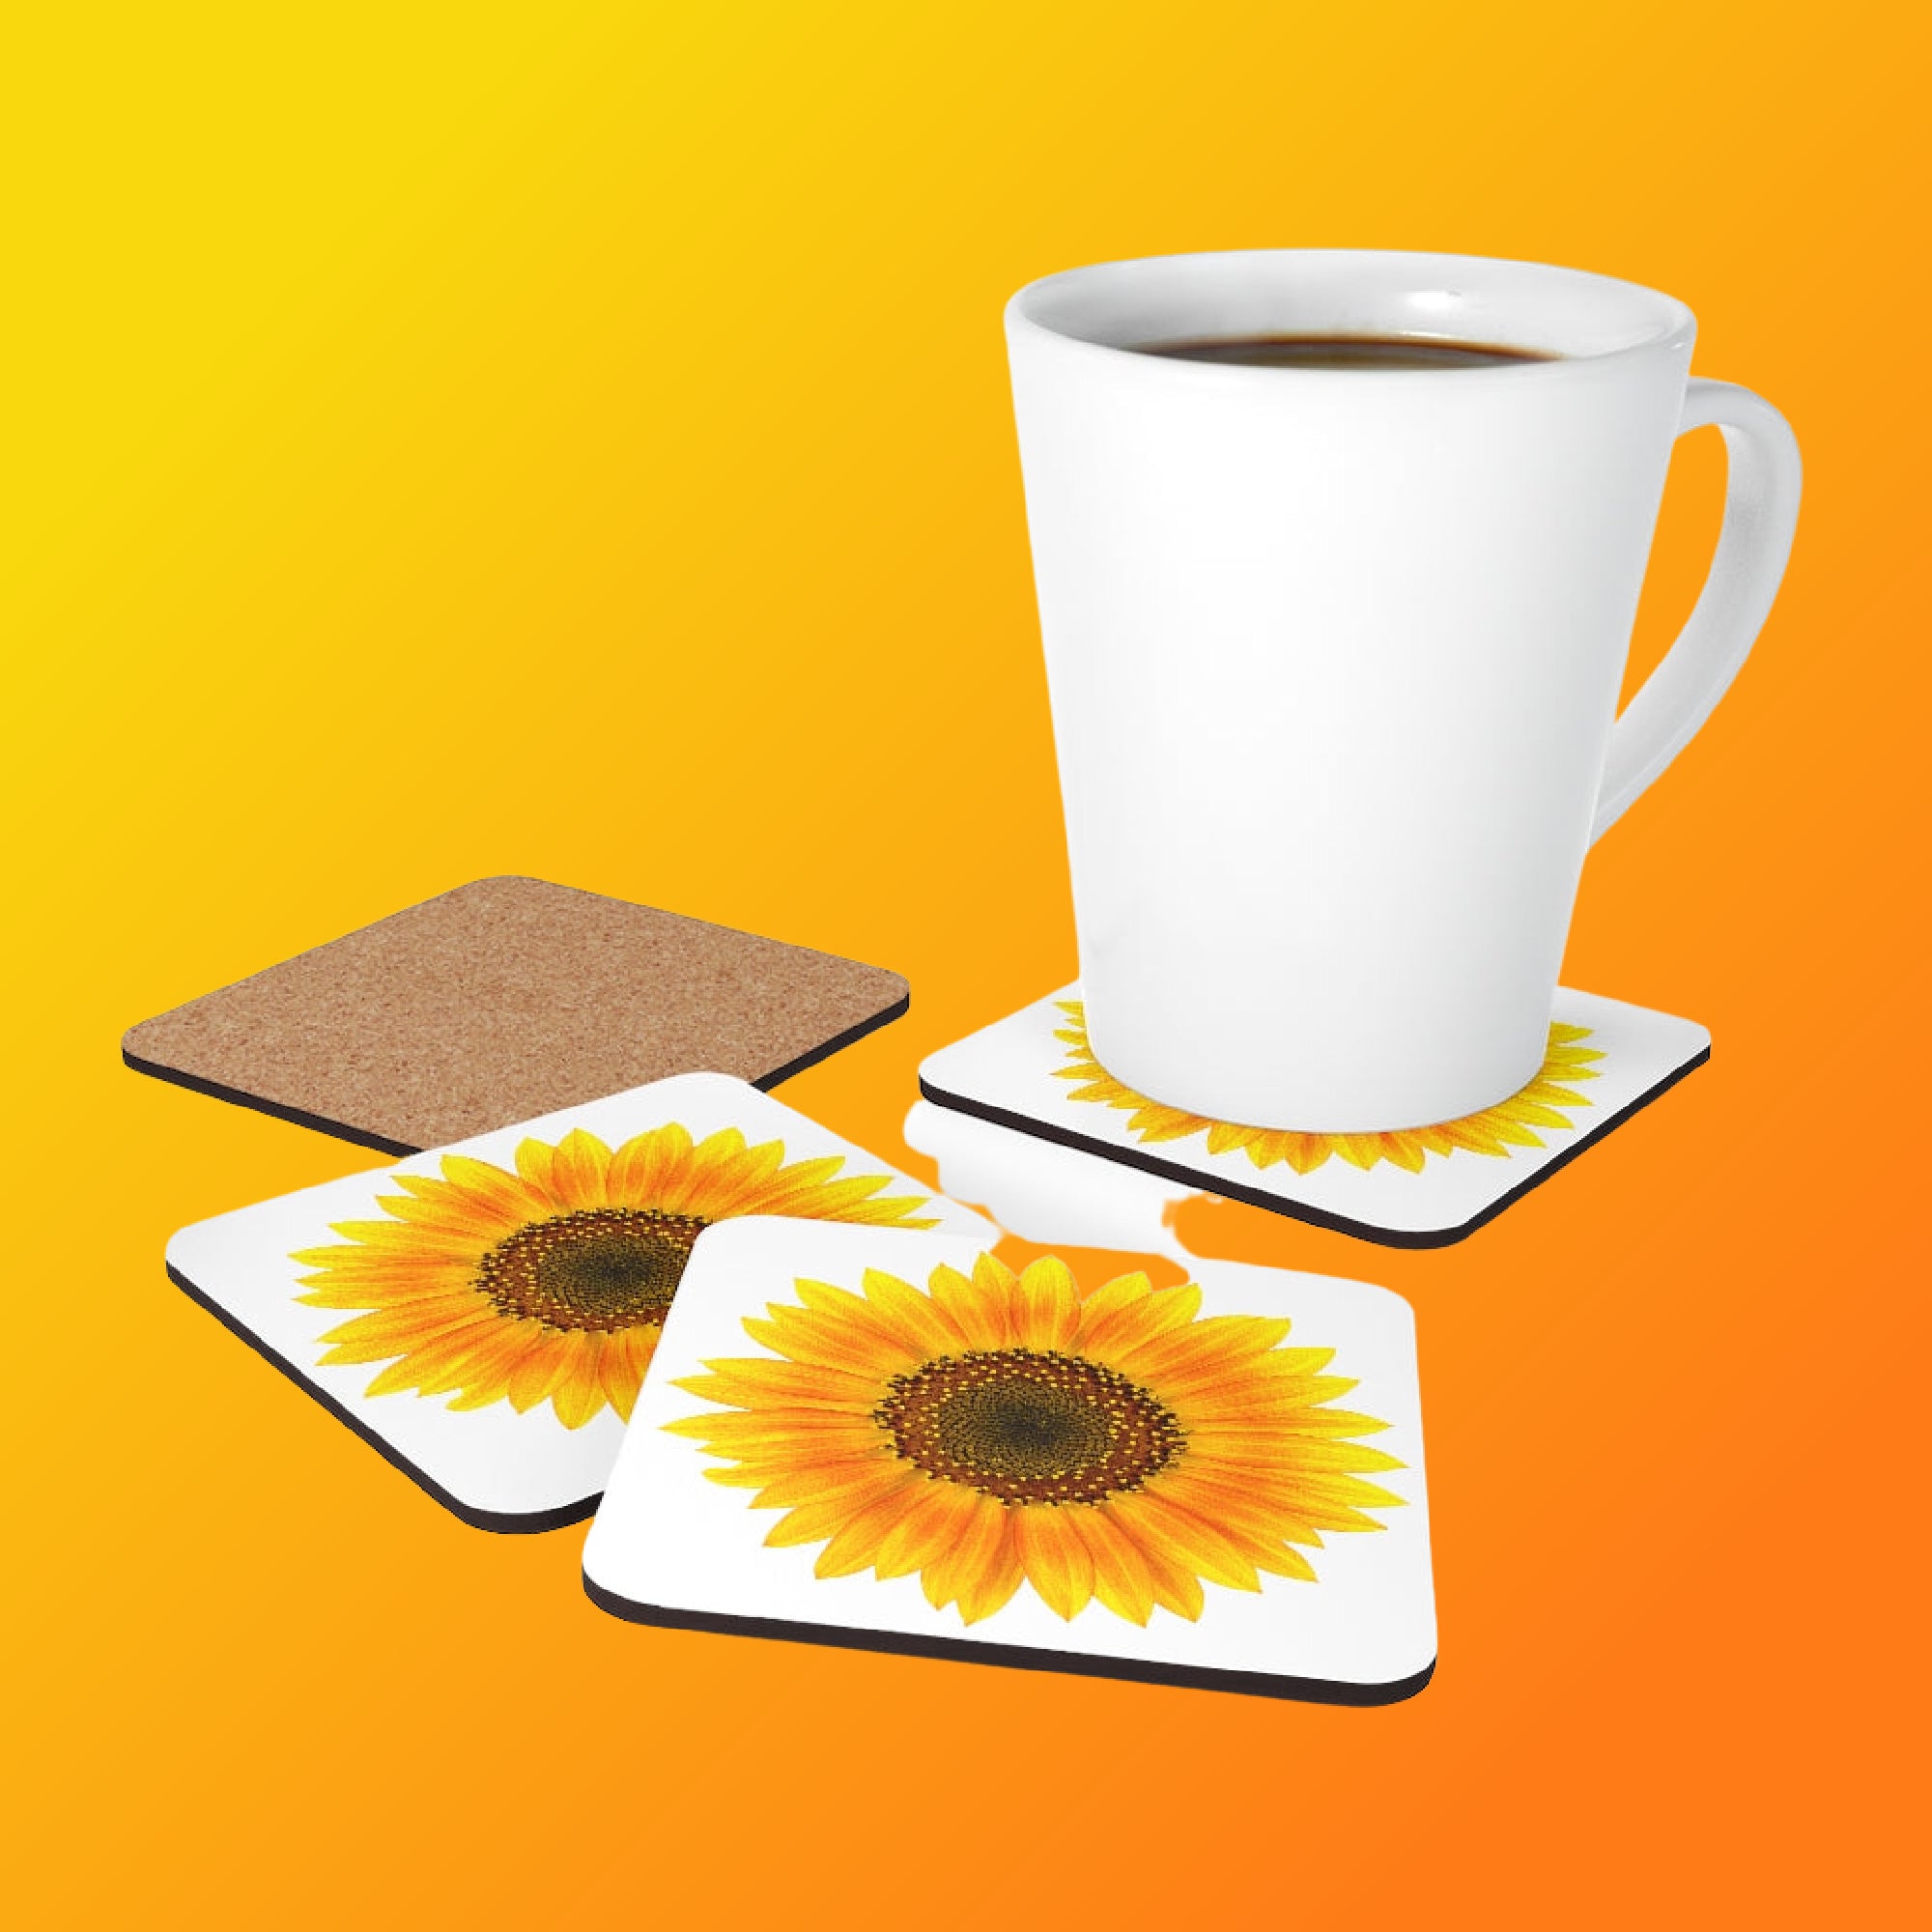 Photo of 3 coasters "face-up" showing a yellow Sunflower with a white latte mug and one coaster "face-down" showing the cork backing